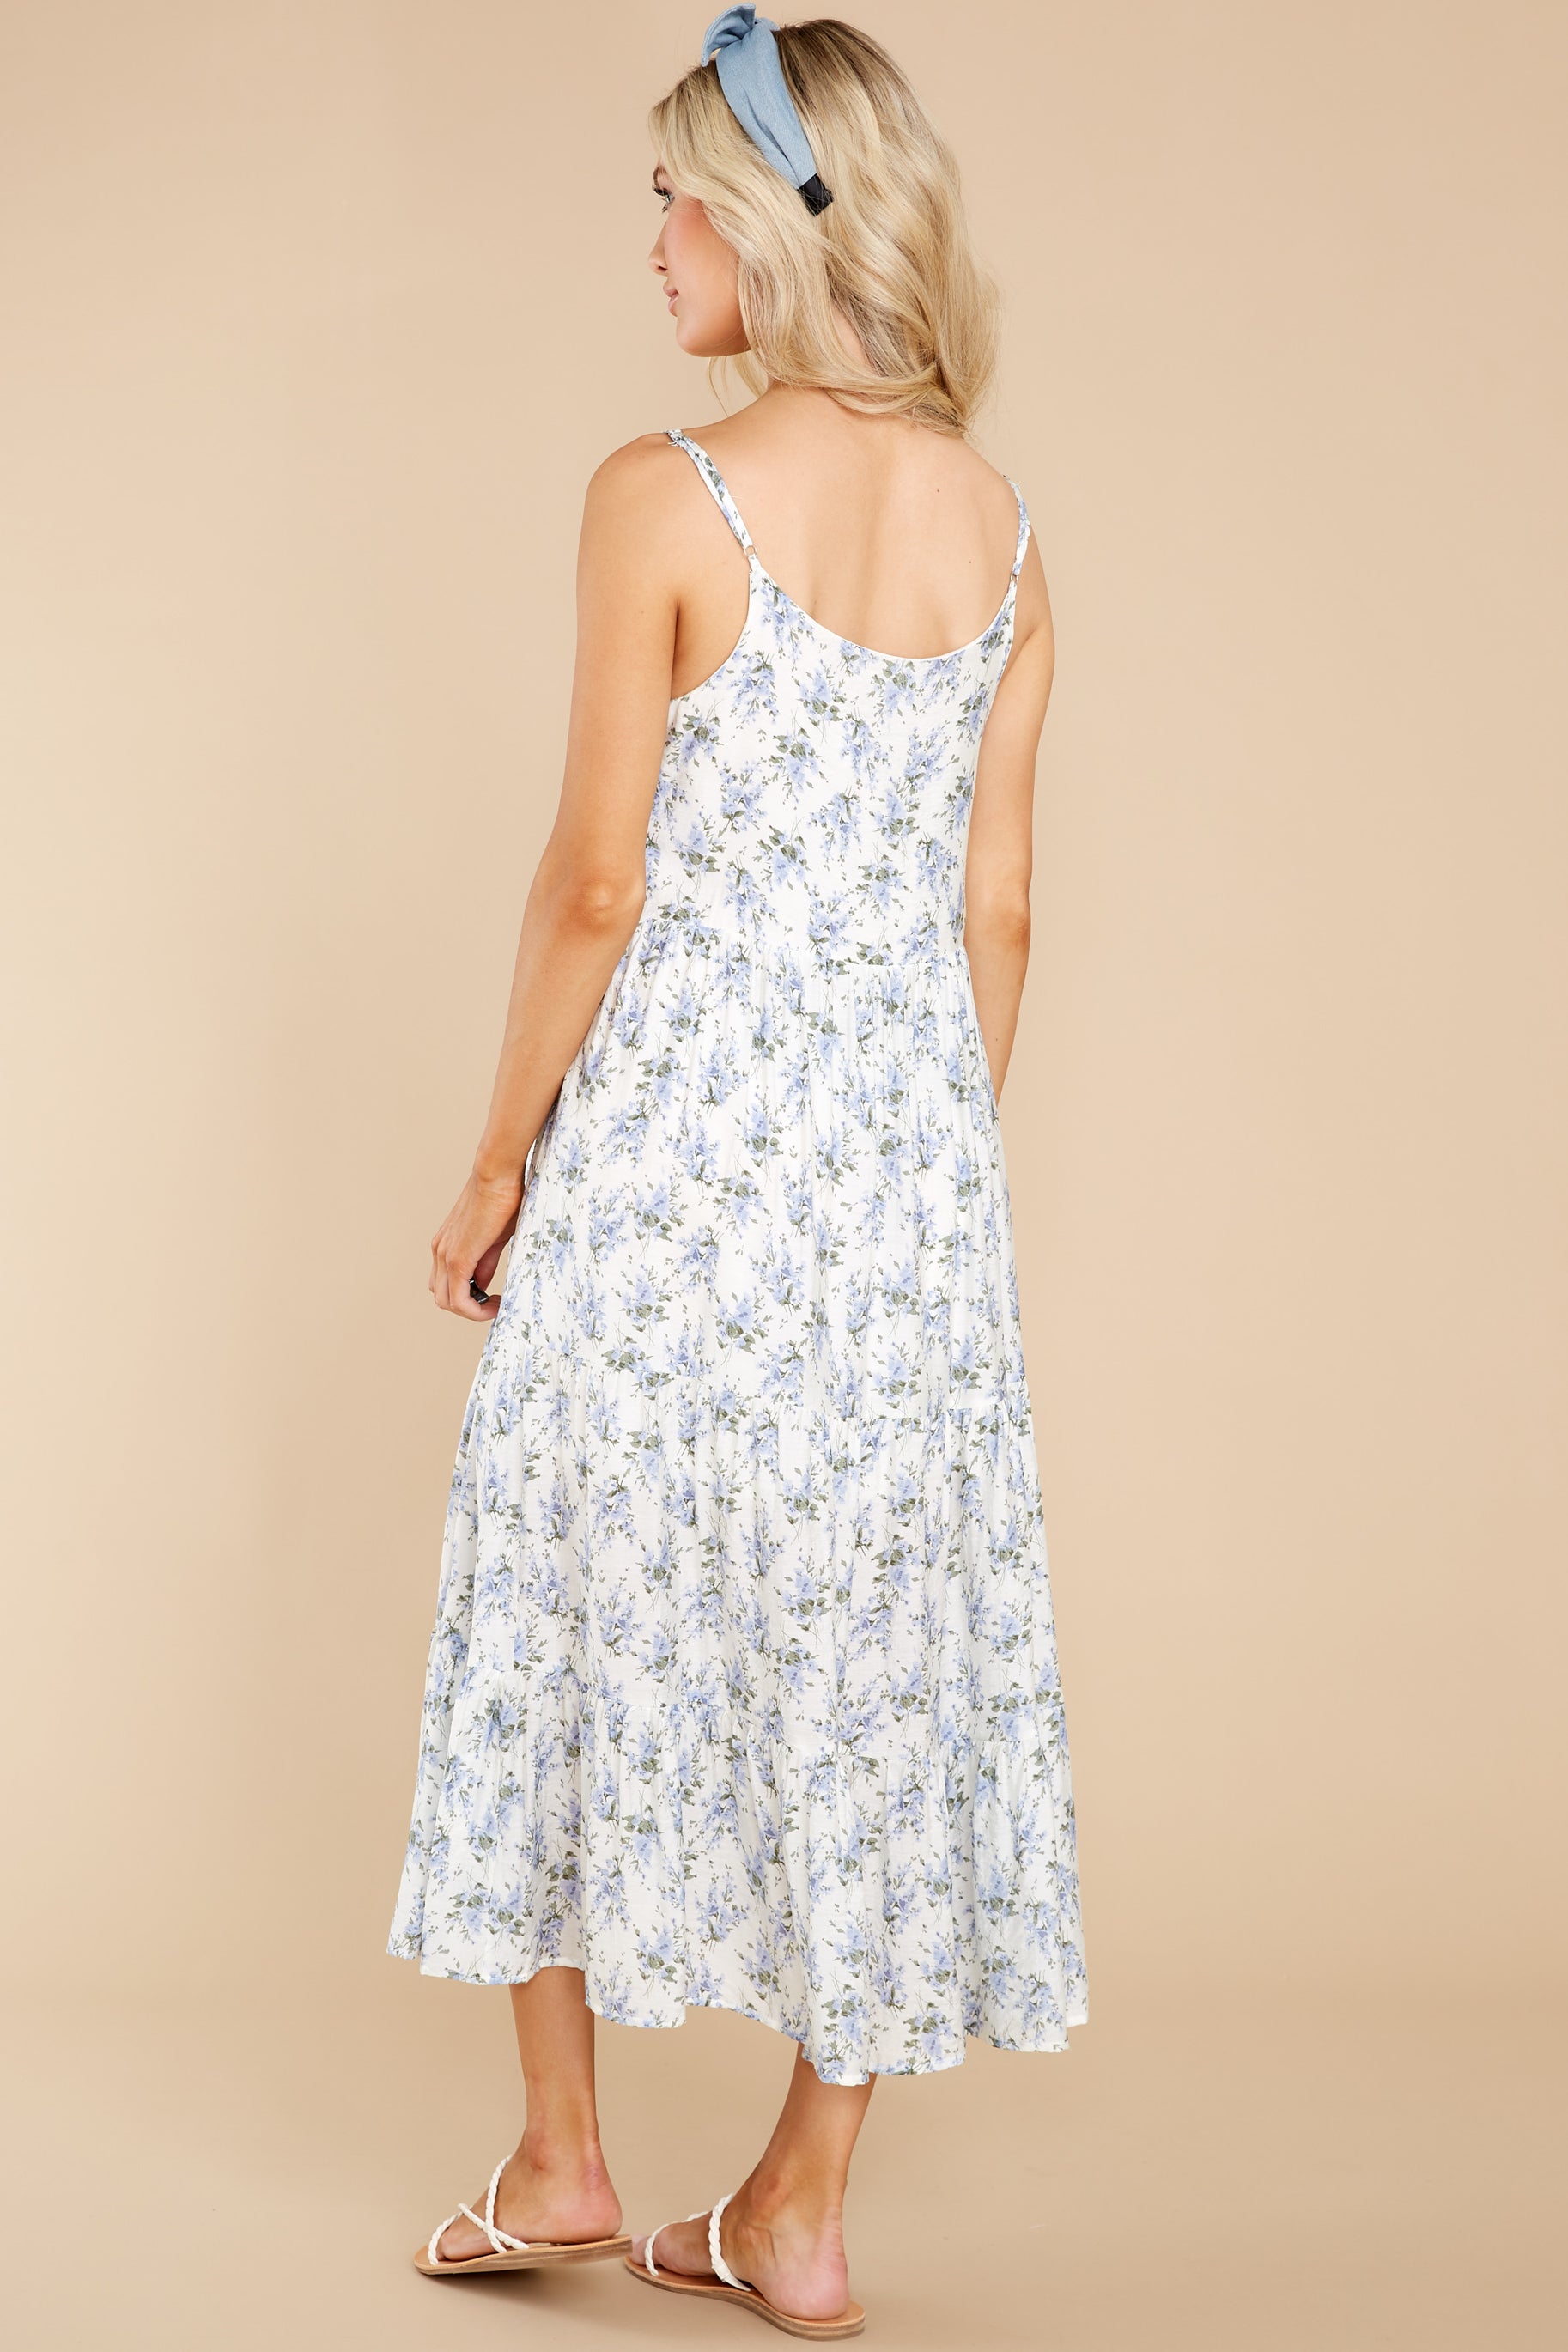 7 New Opportunity Blue And White Floral Print Midi Dress at reddress.com